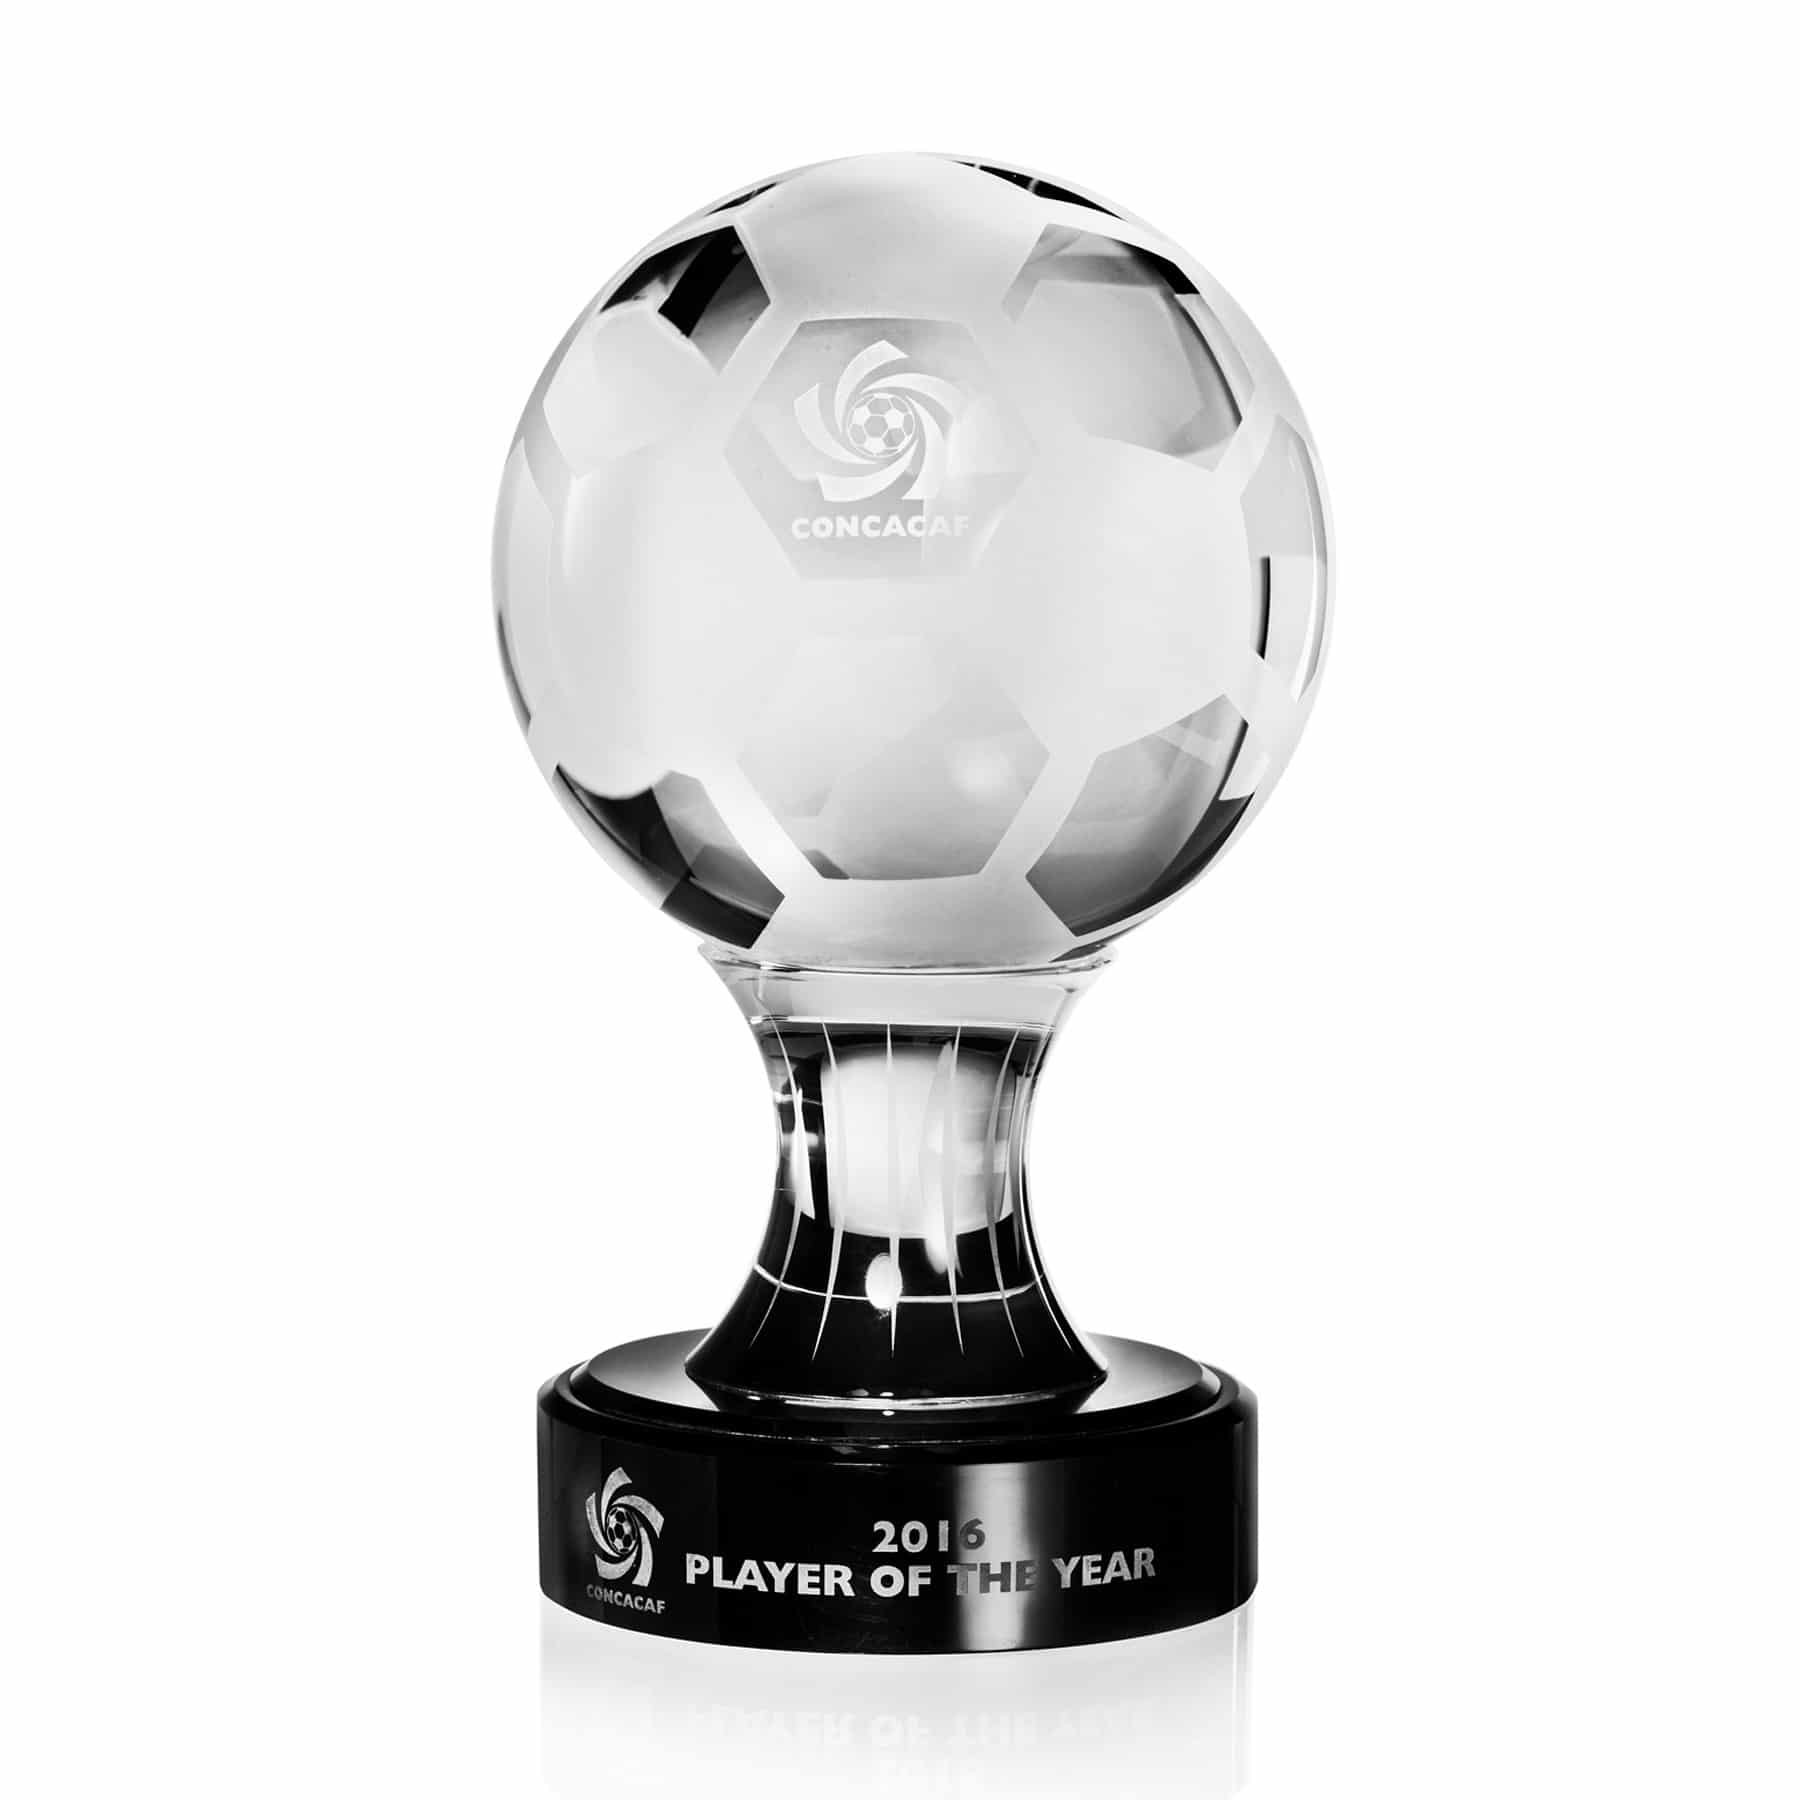 Concacaf Player of the Year Award